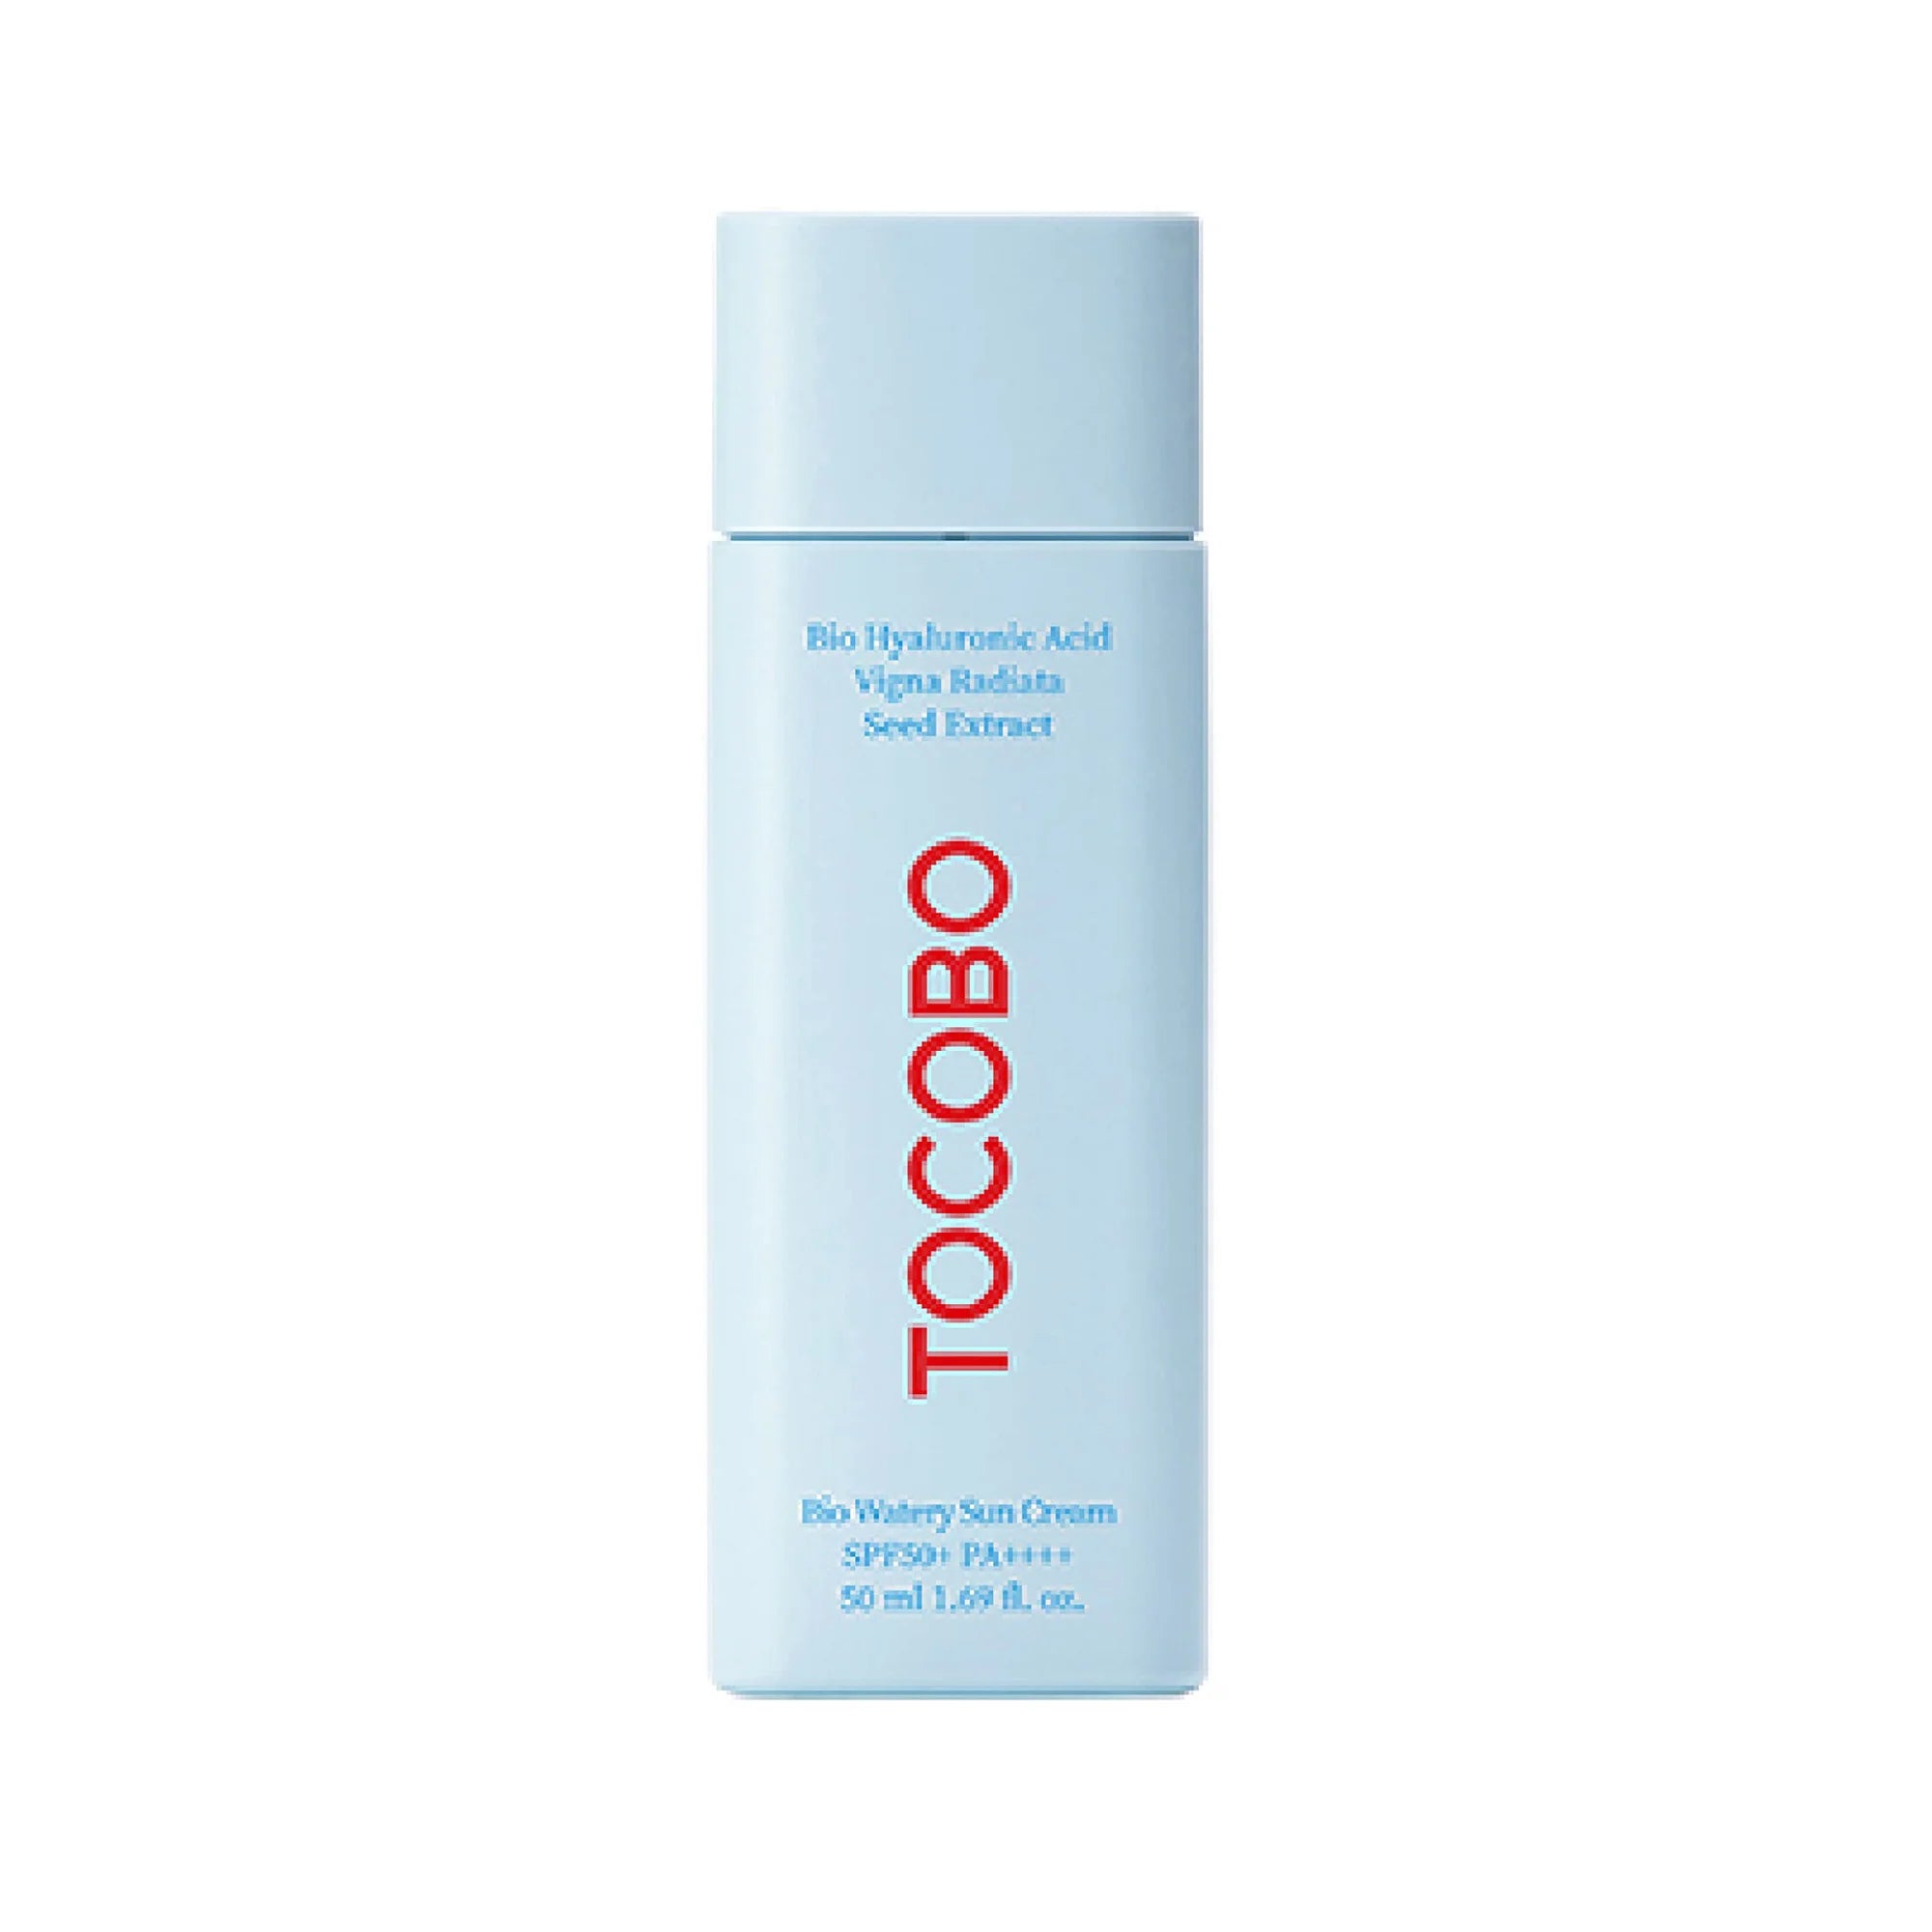 Tocobo Bio Watery Sun Cream SPF50+ PA++++ lightweight non-greasy sunscreen without white cast dry sensitive combination skin types K Beauty World